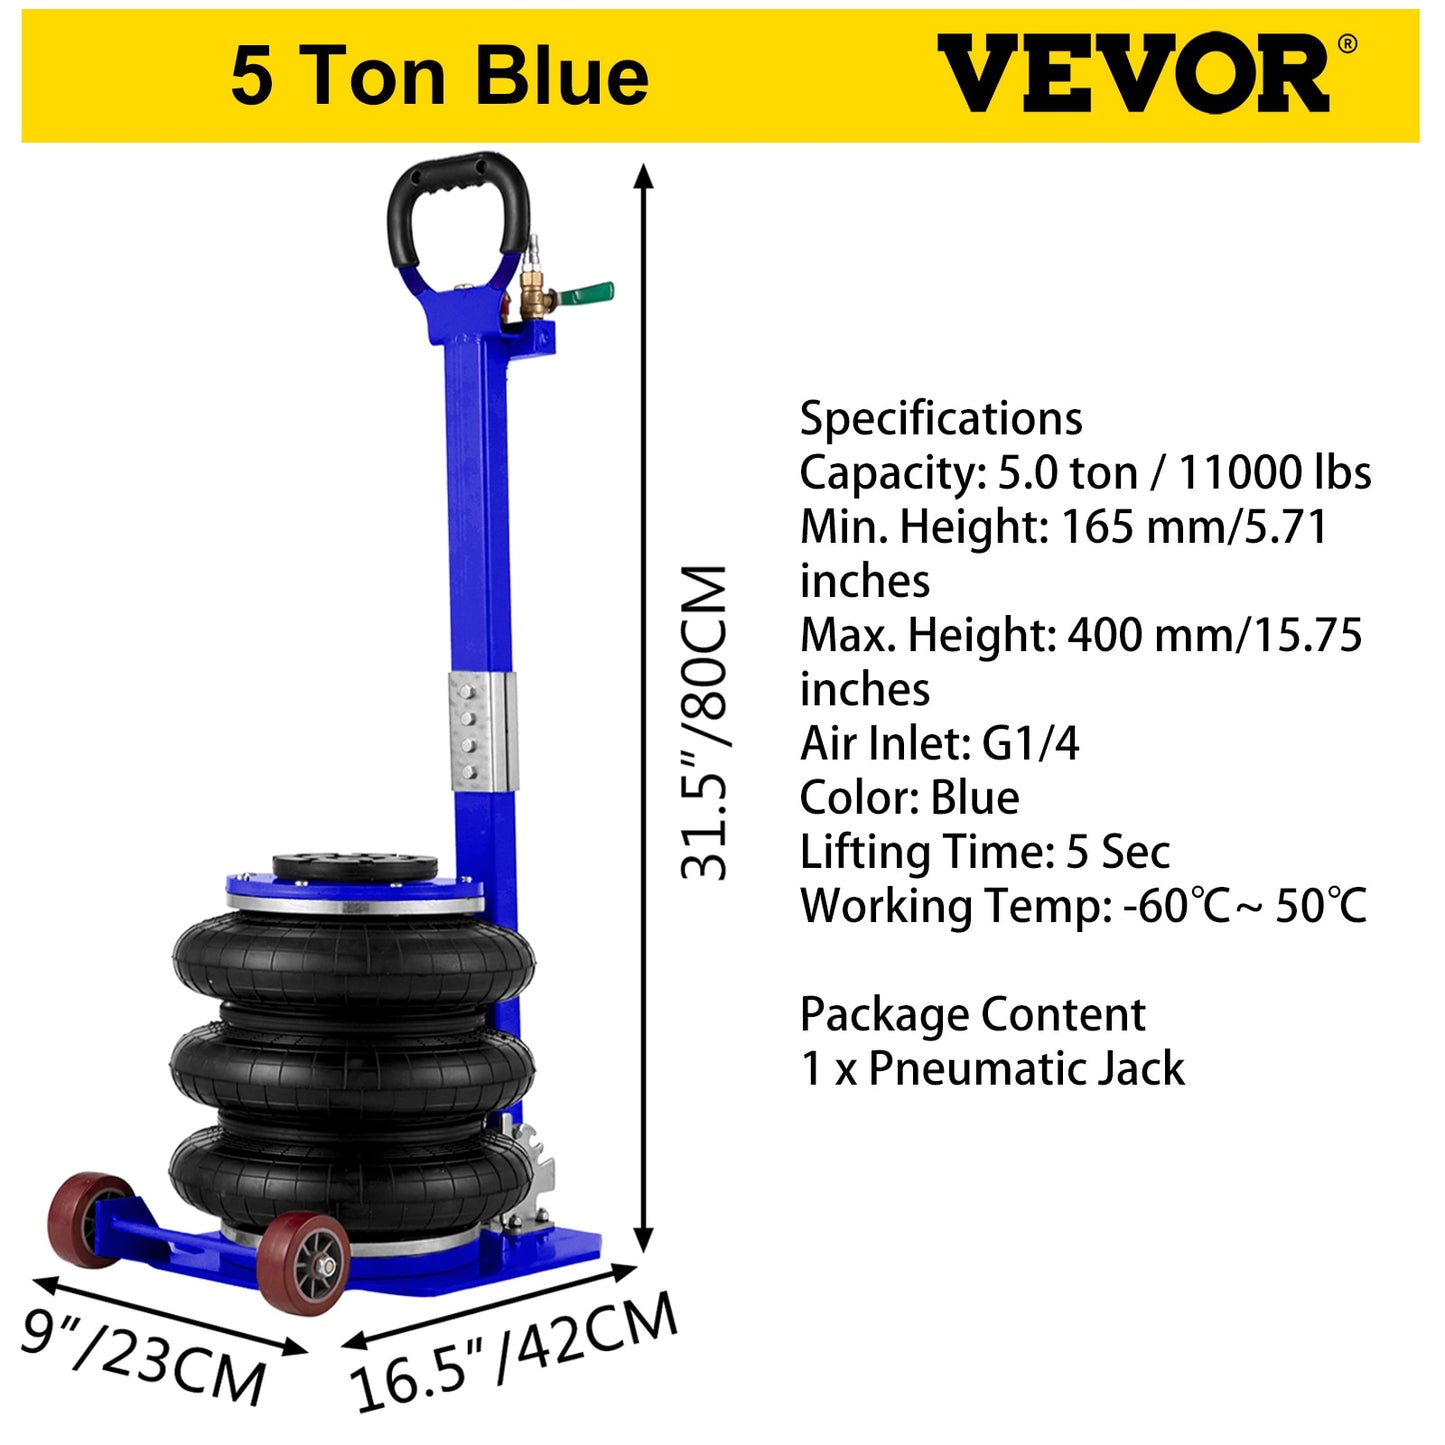 3 Ton / 5 Ton Triple Bag Air Pneumatic Jack with Adjustable Handle for Cars, Vans, and SUVs